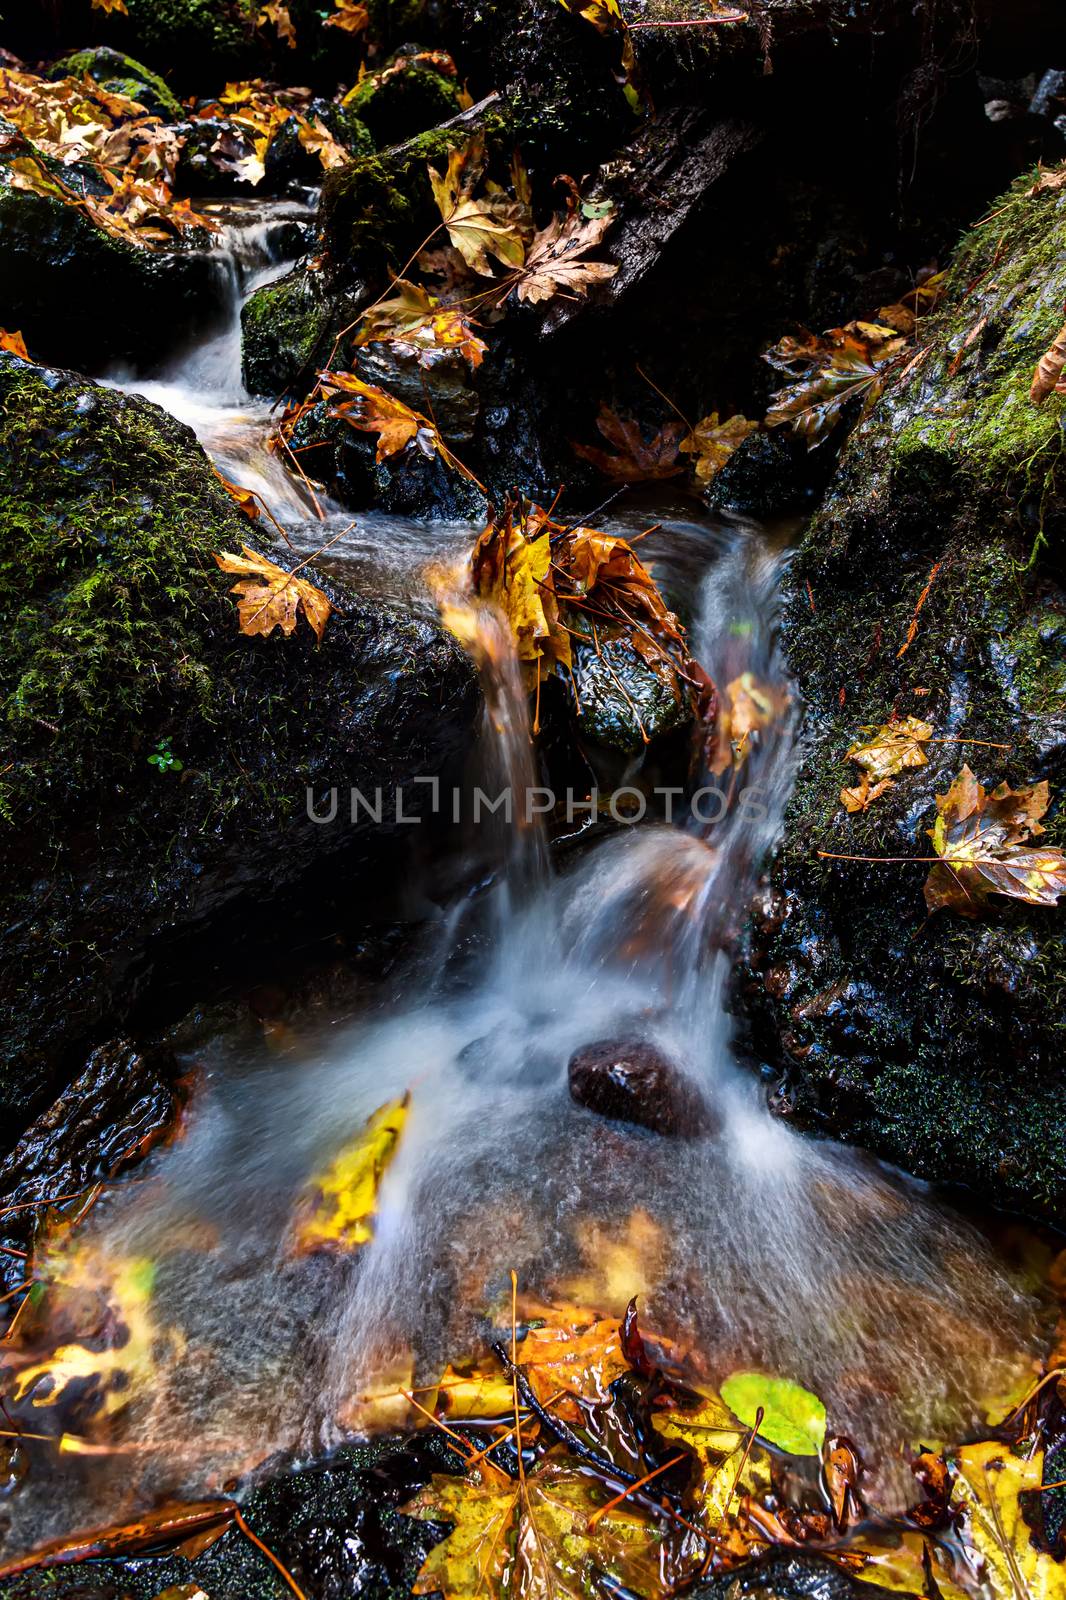 A small waterfall flows around fallen maple leaves in the northern California forest.